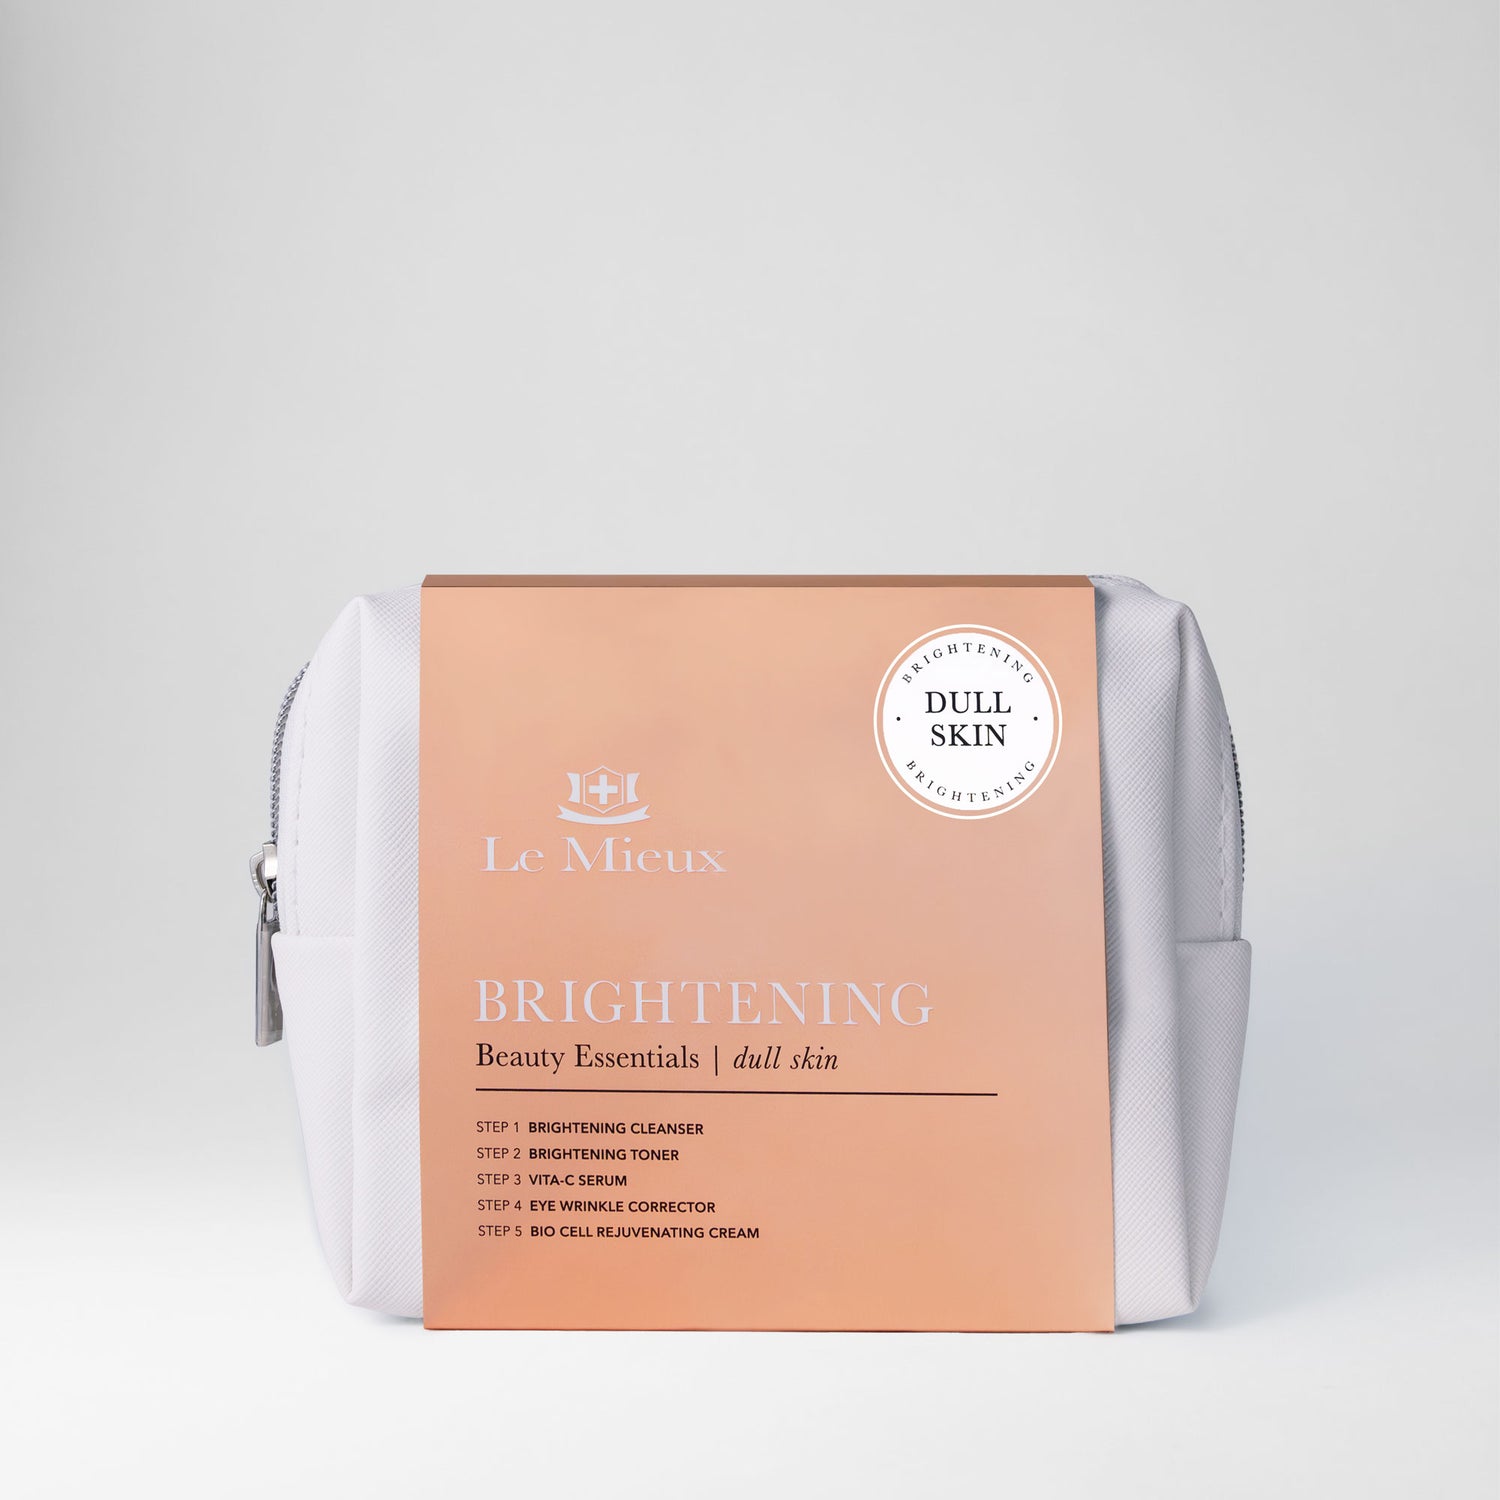  BRIGHTENING BEAUTY ESSENTIALS from Le Mieux Skincare - 1